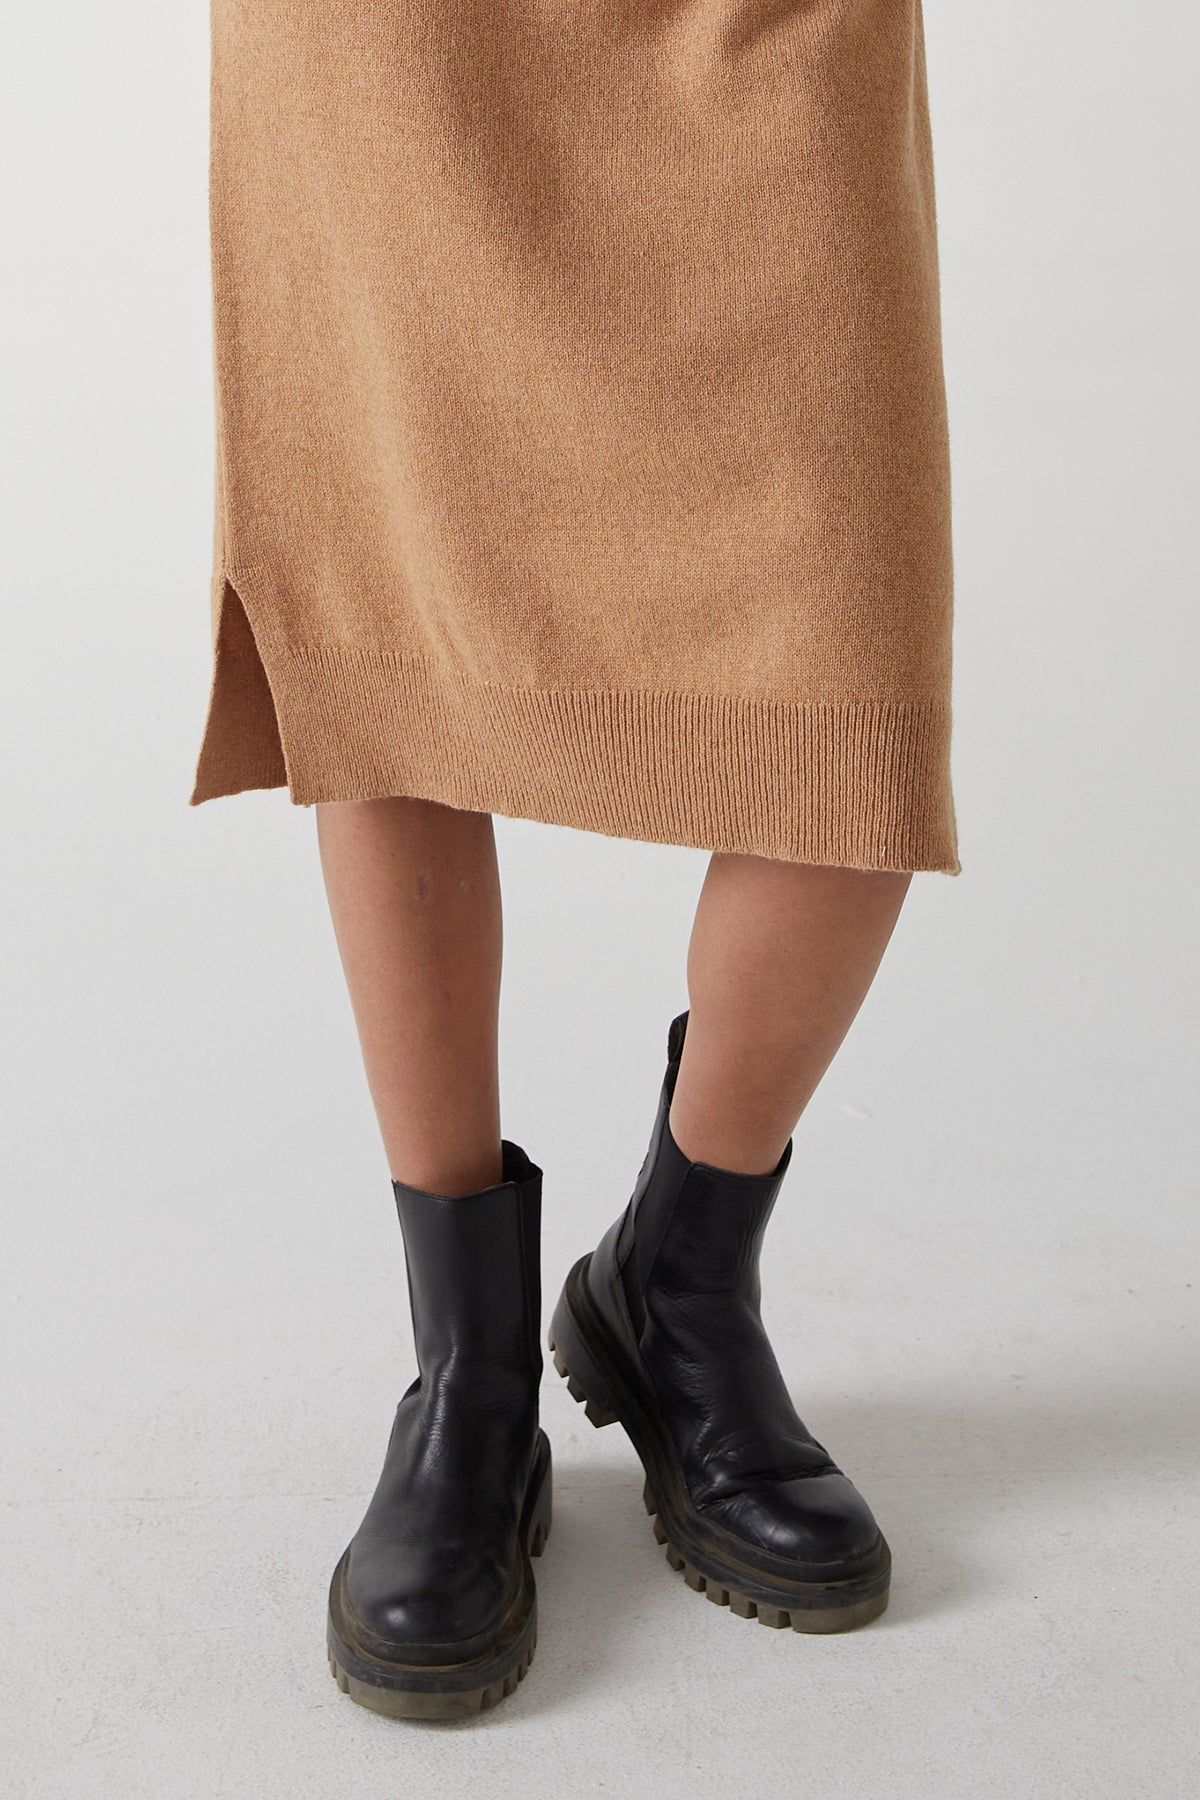 A woman wearing a Velvet by Jenny Graham Laurel Dress with side hem slits and black boots.-25315843801281